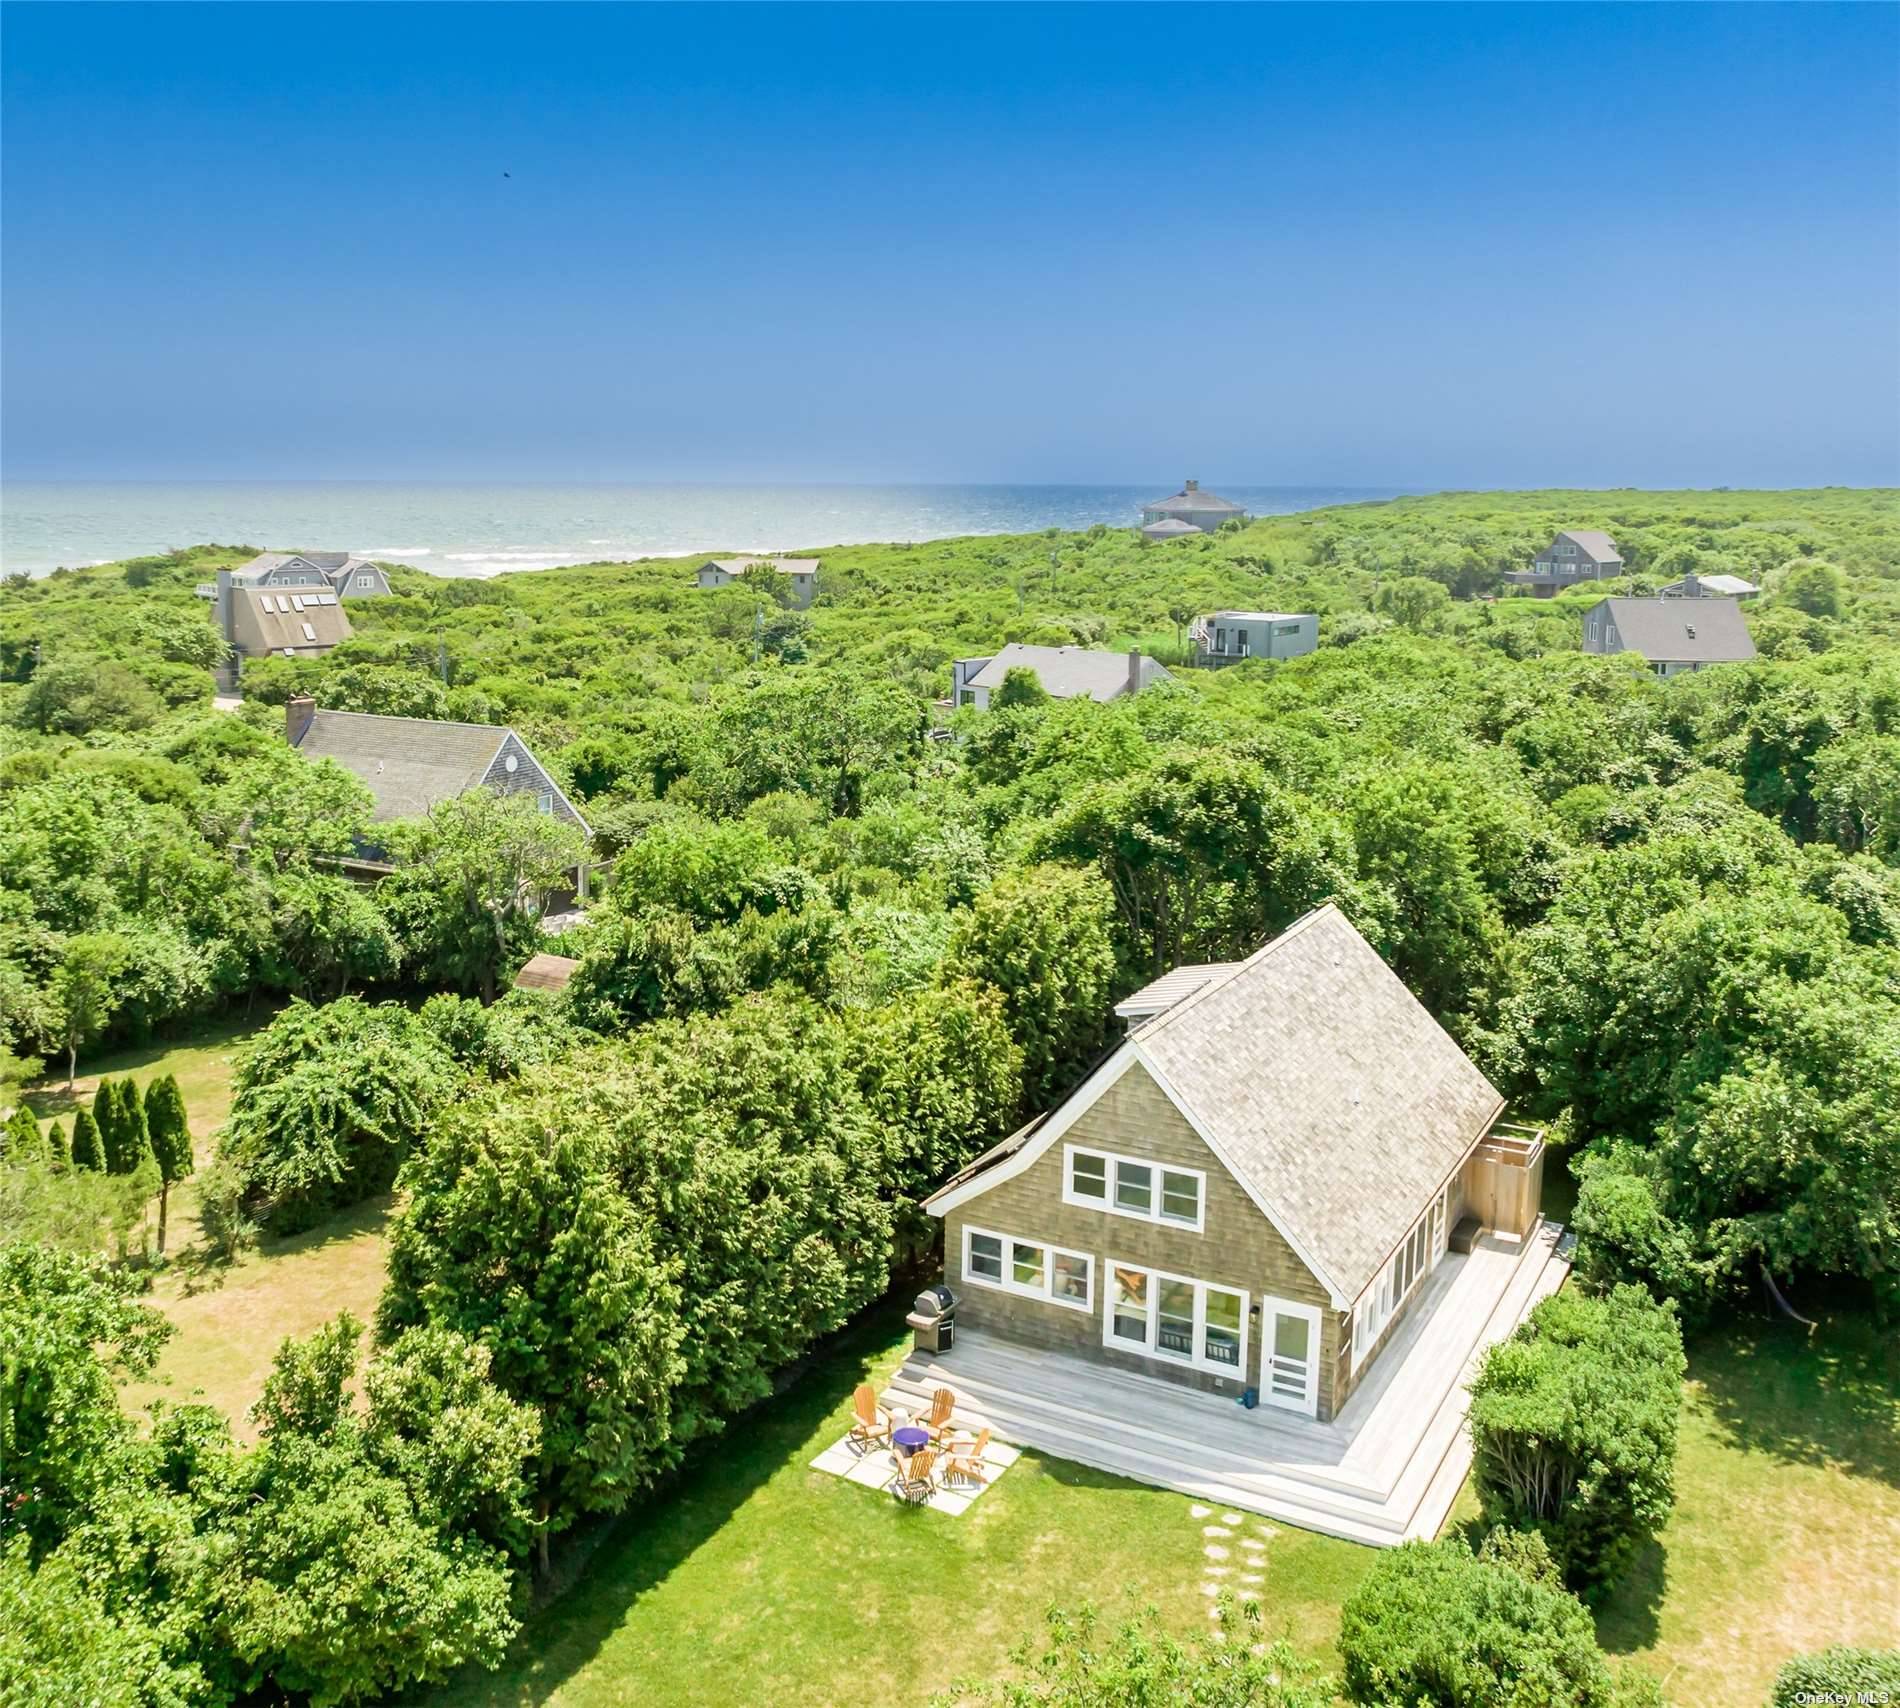 Montauk Ditch Plains Escape to the ultimate surfer's paradise in Montauk, the Hamptons' renowned surf Mecca.